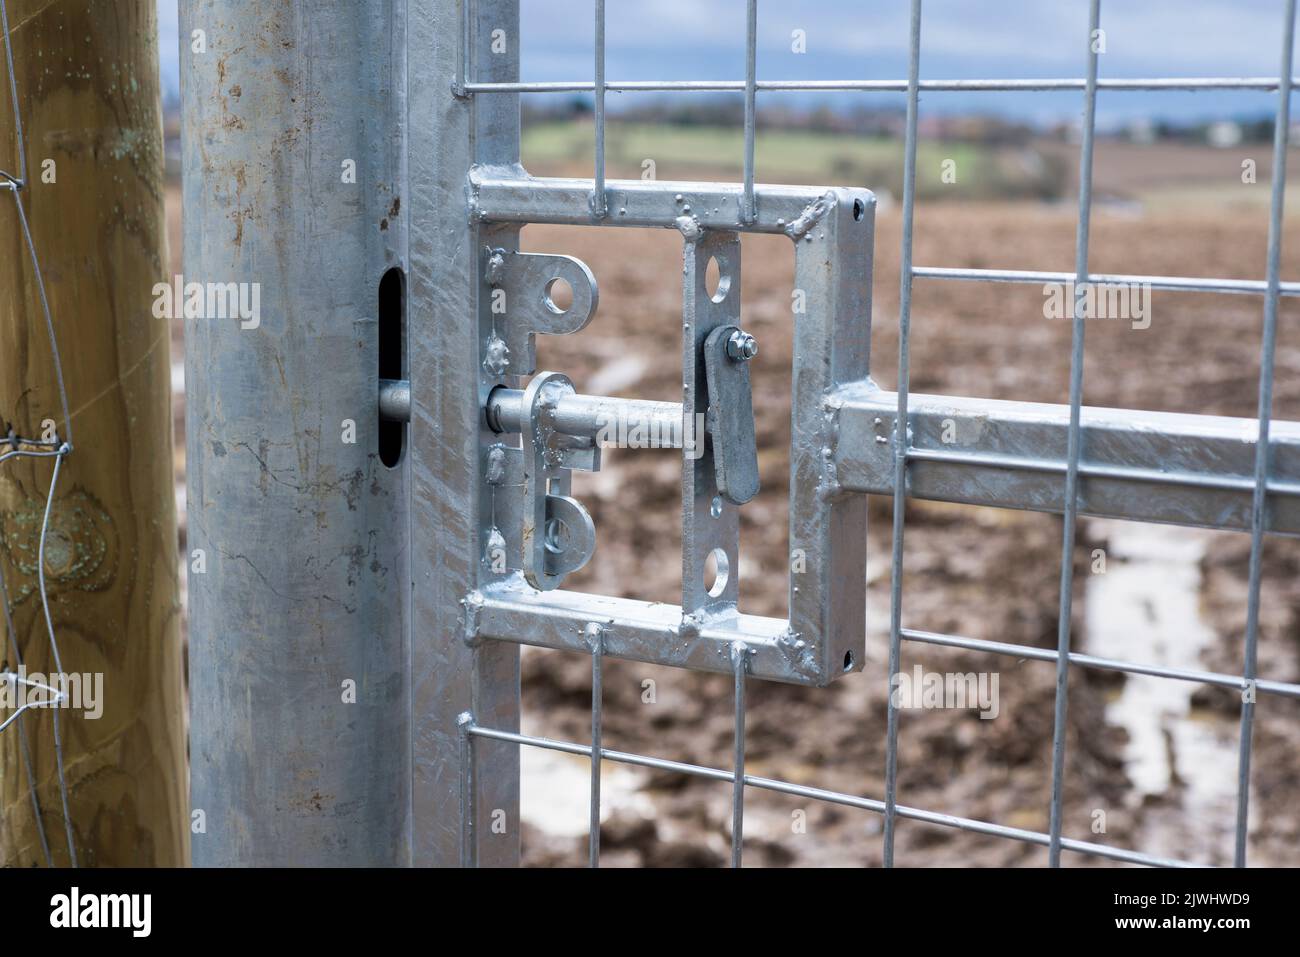 A brand new galvanised steel gate with lock with wet muddy farmers field beyond it in a rural area of north London England UK Stock Photo